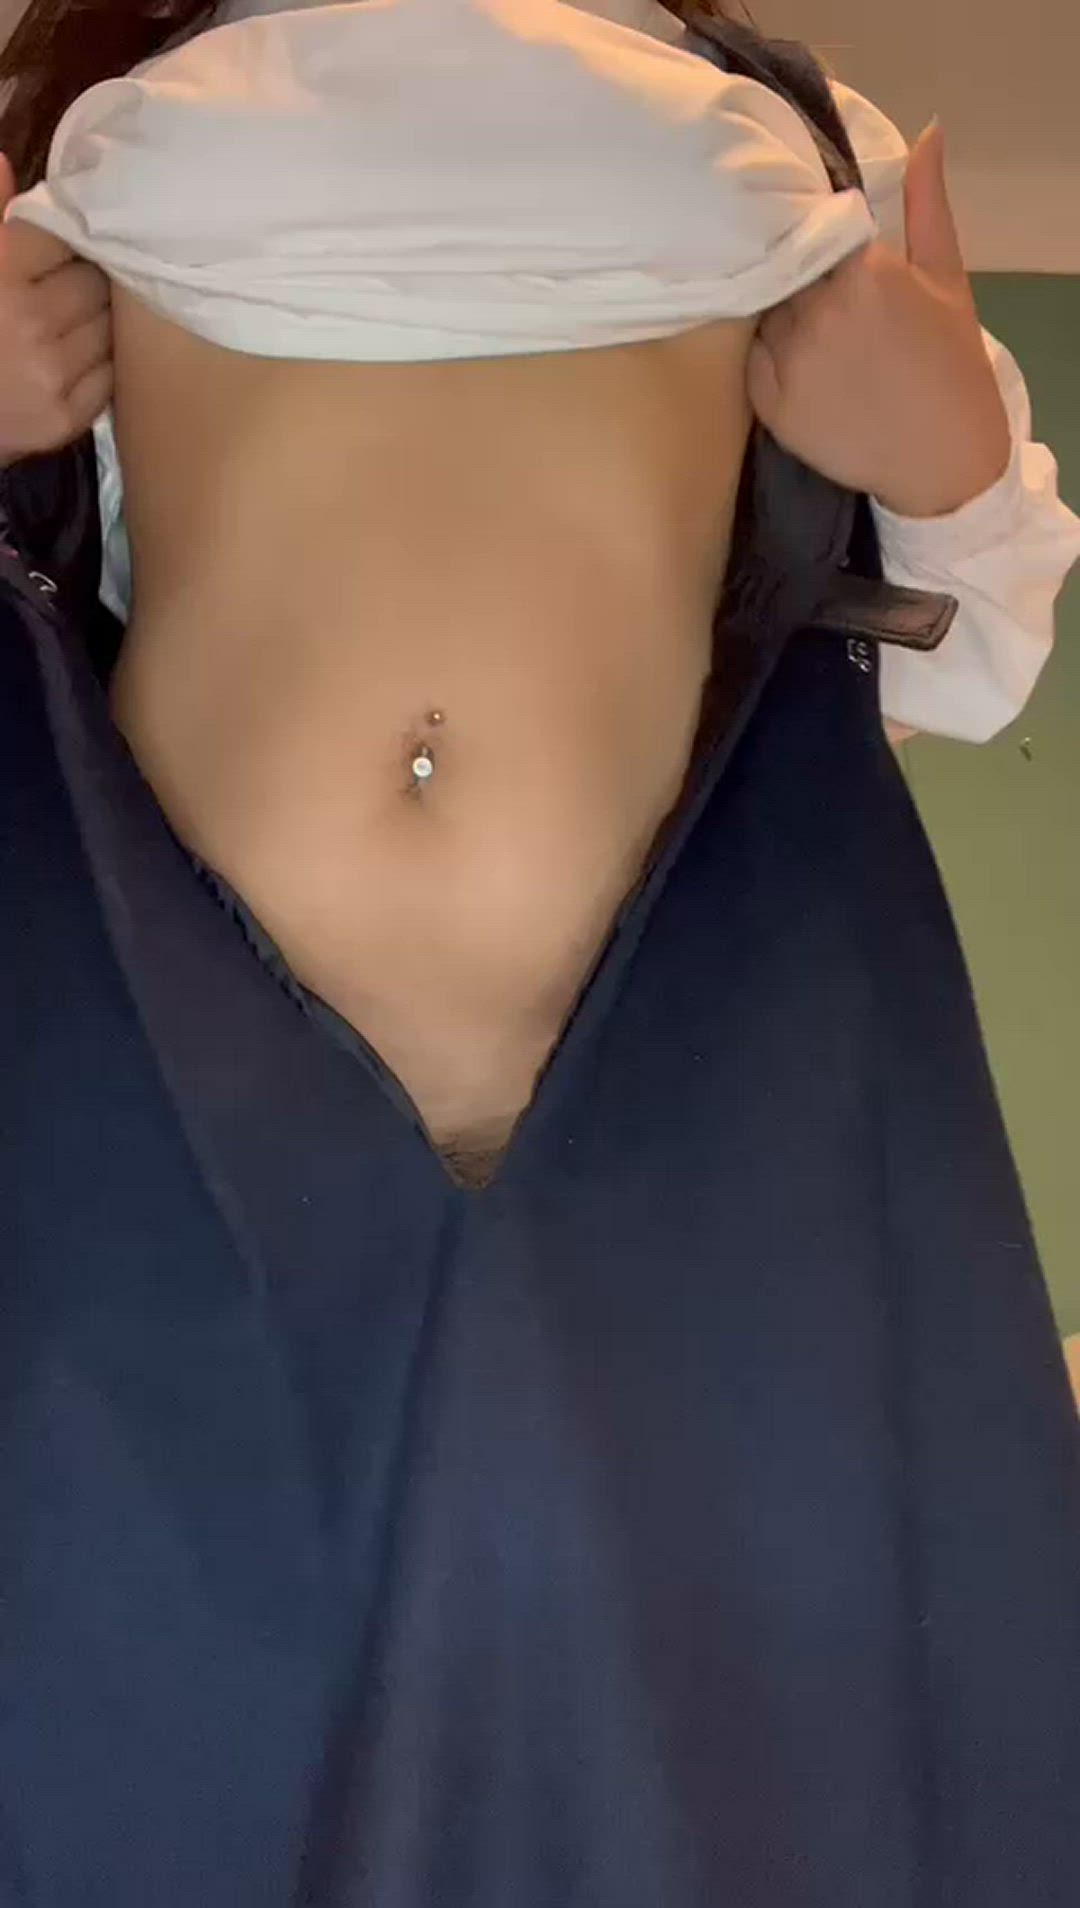 Amateur porn video with onlyfans model teasegf <strong>@aznbabeinnorway</strong>